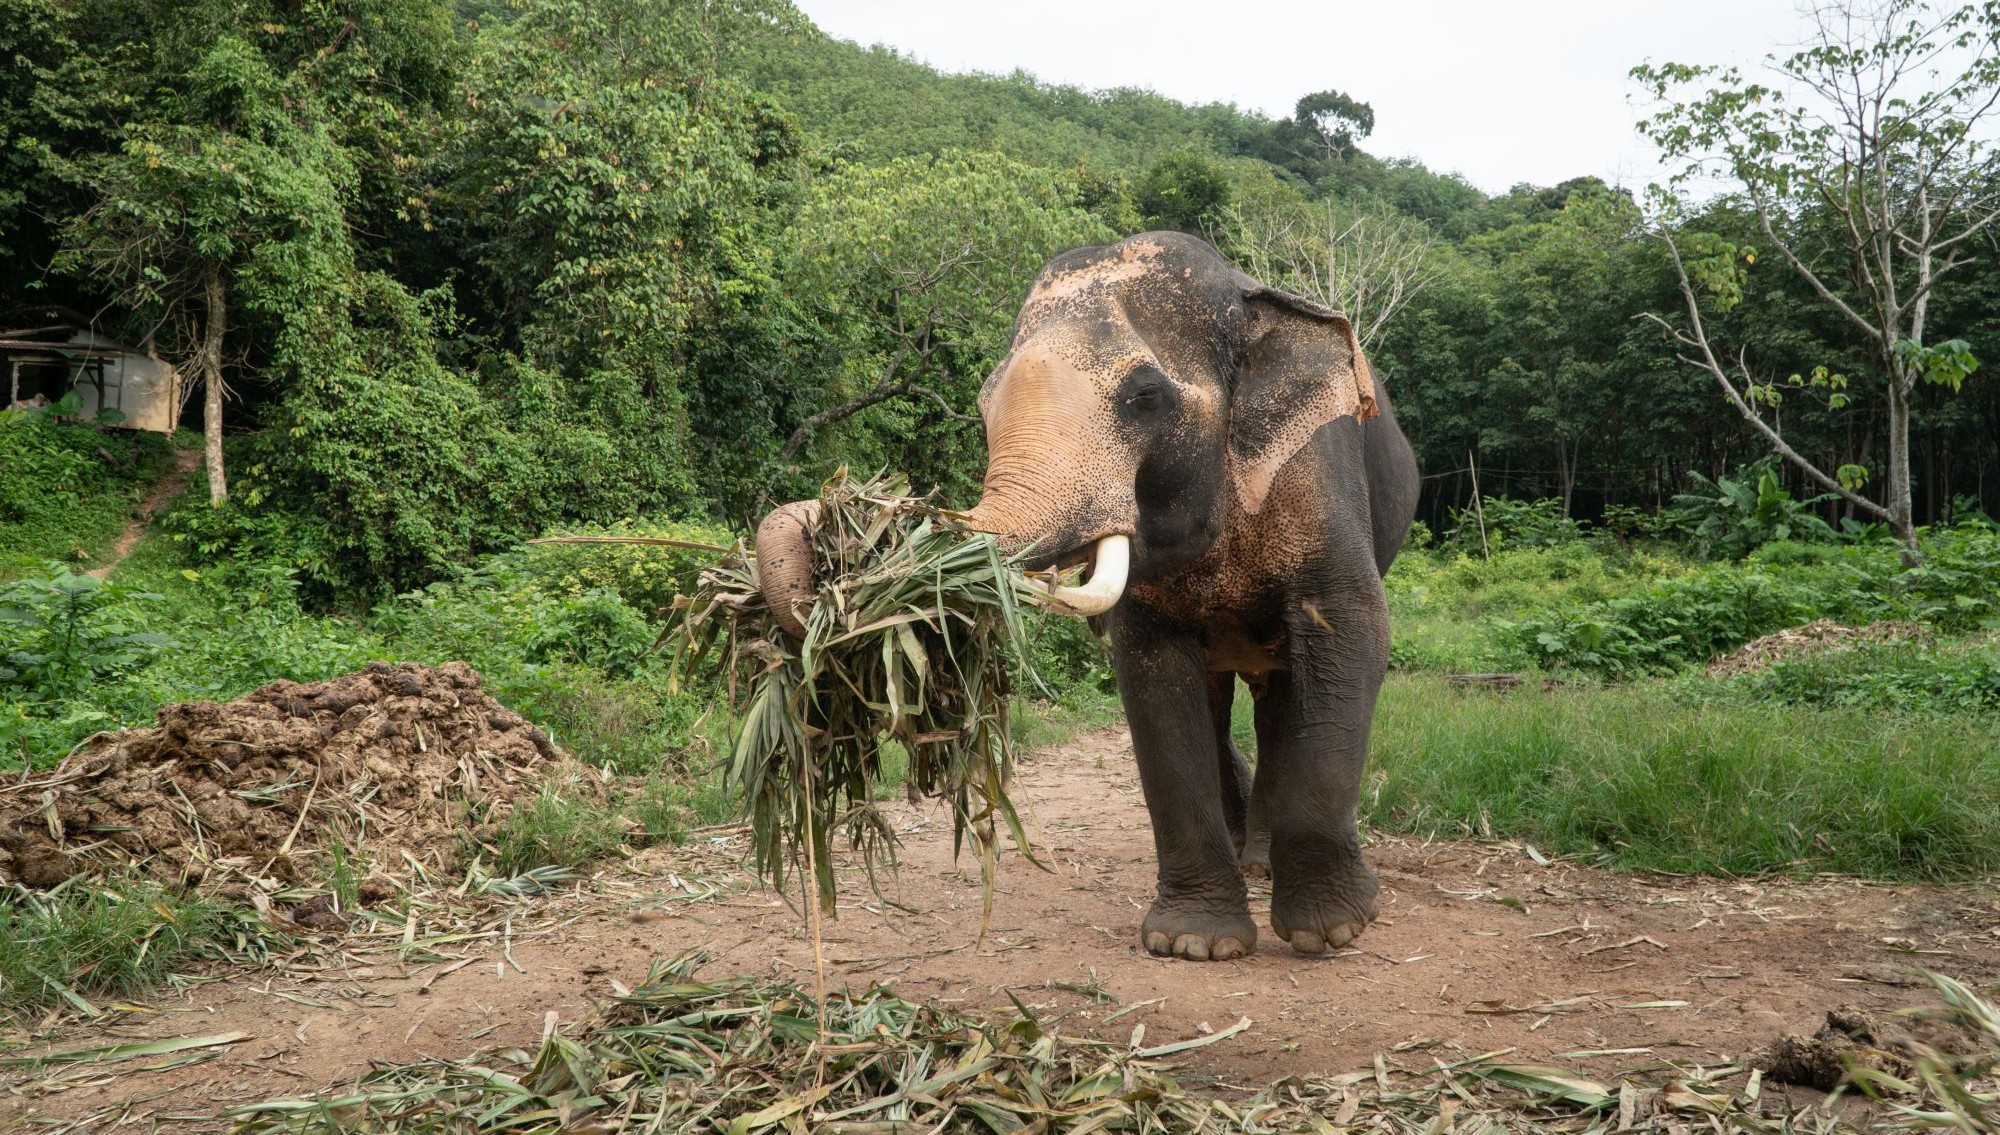 End of the ride: Thailand’s changing attitude to captive elephant tourism